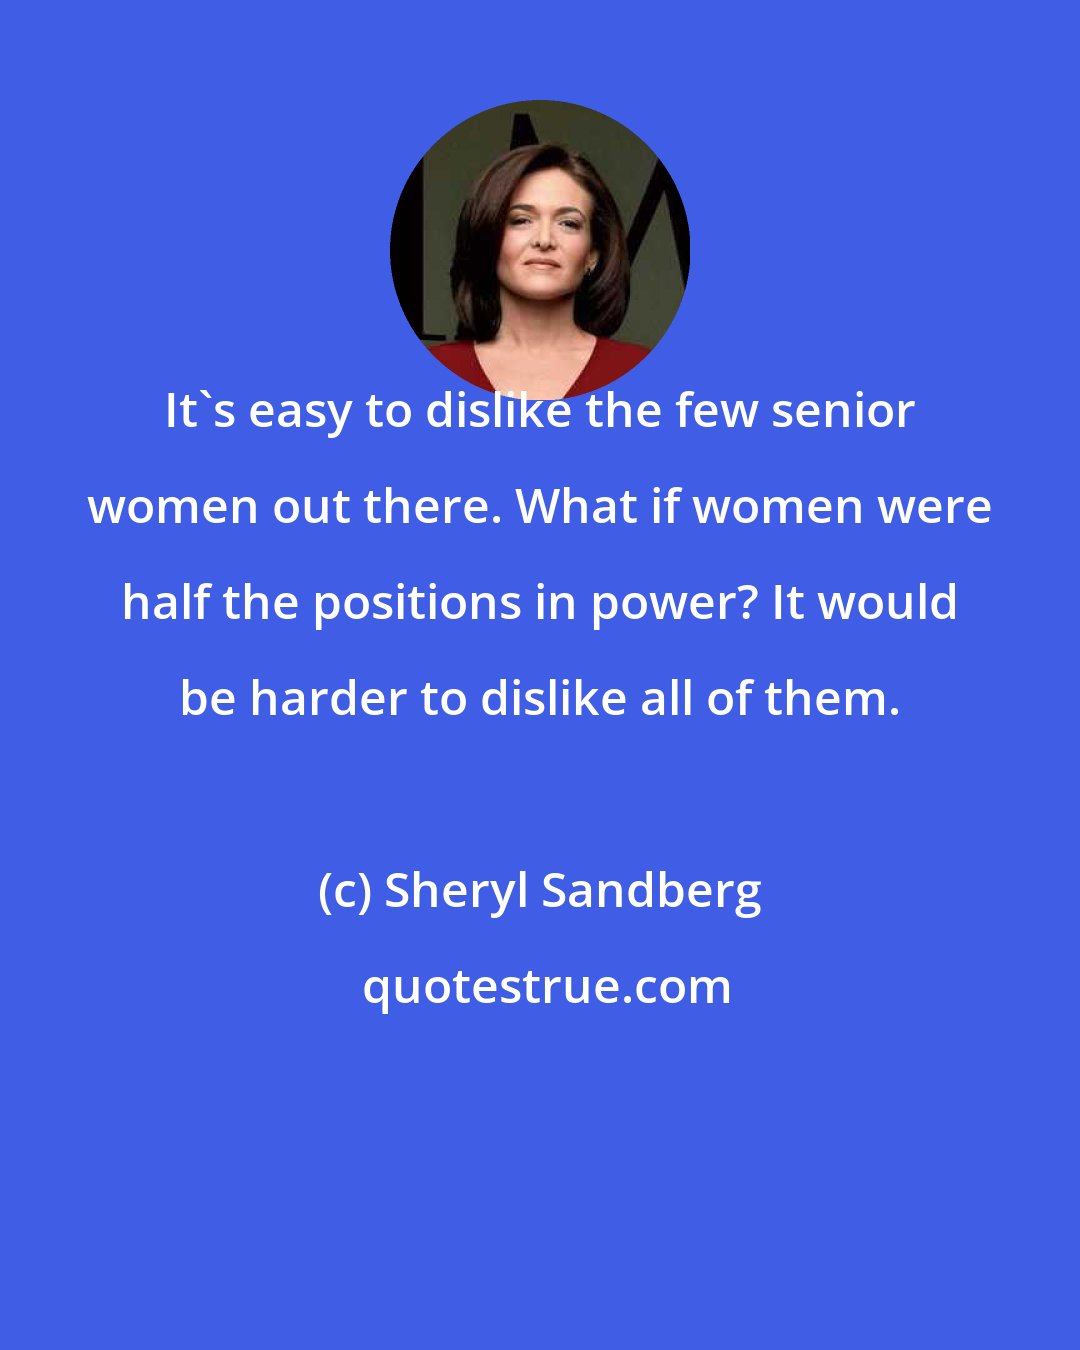 Sheryl Sandberg: It's easy to dislike the few senior women out there. What if women were half the positions in power? It would be harder to dislike all of them.